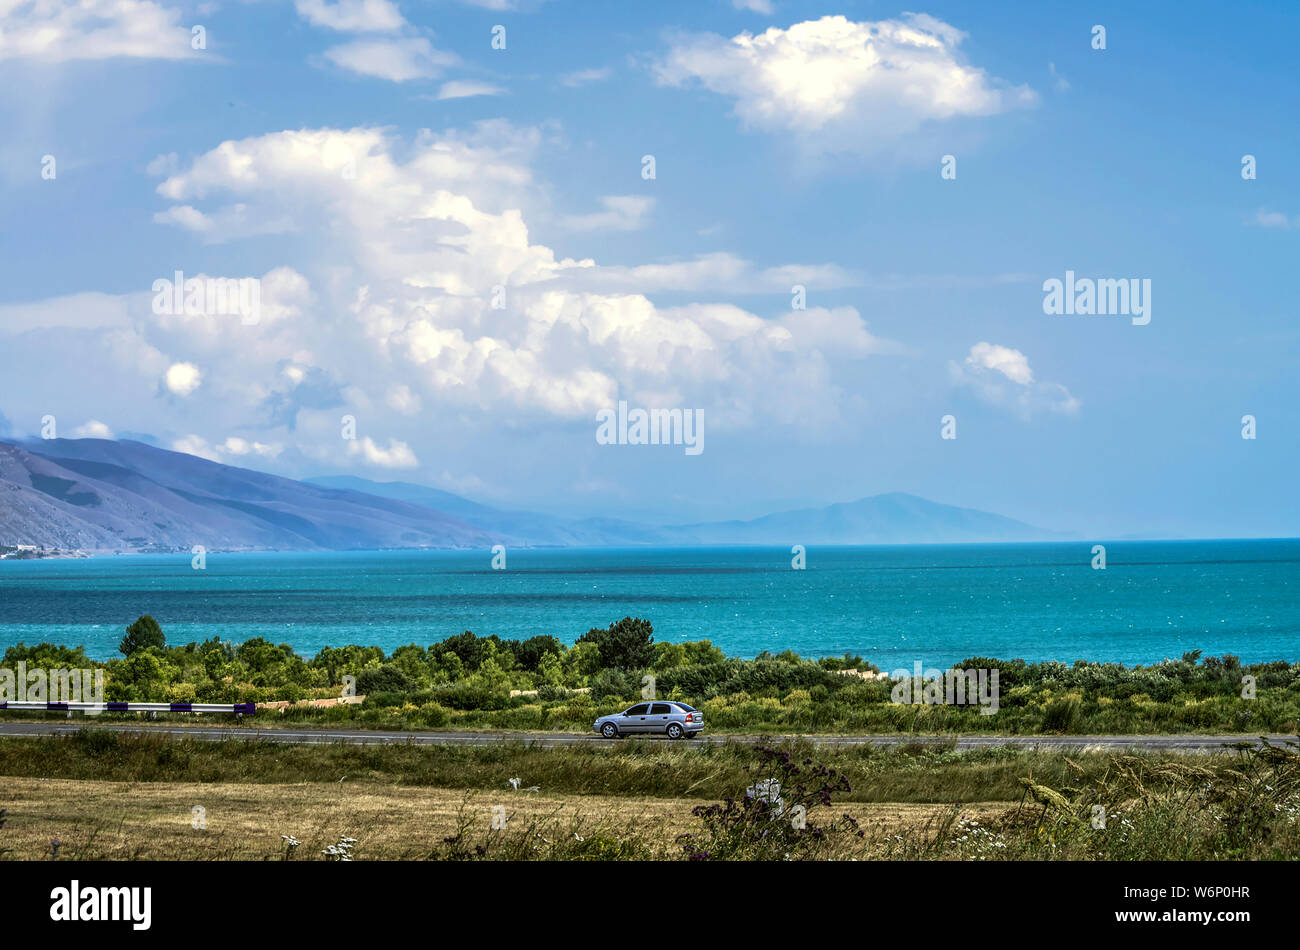 Highway passing along the coast of the azure coast of the Alpine lake Sevan at an altitude of 1900 meters above sea level in the mountains of Armenia Stock Photo